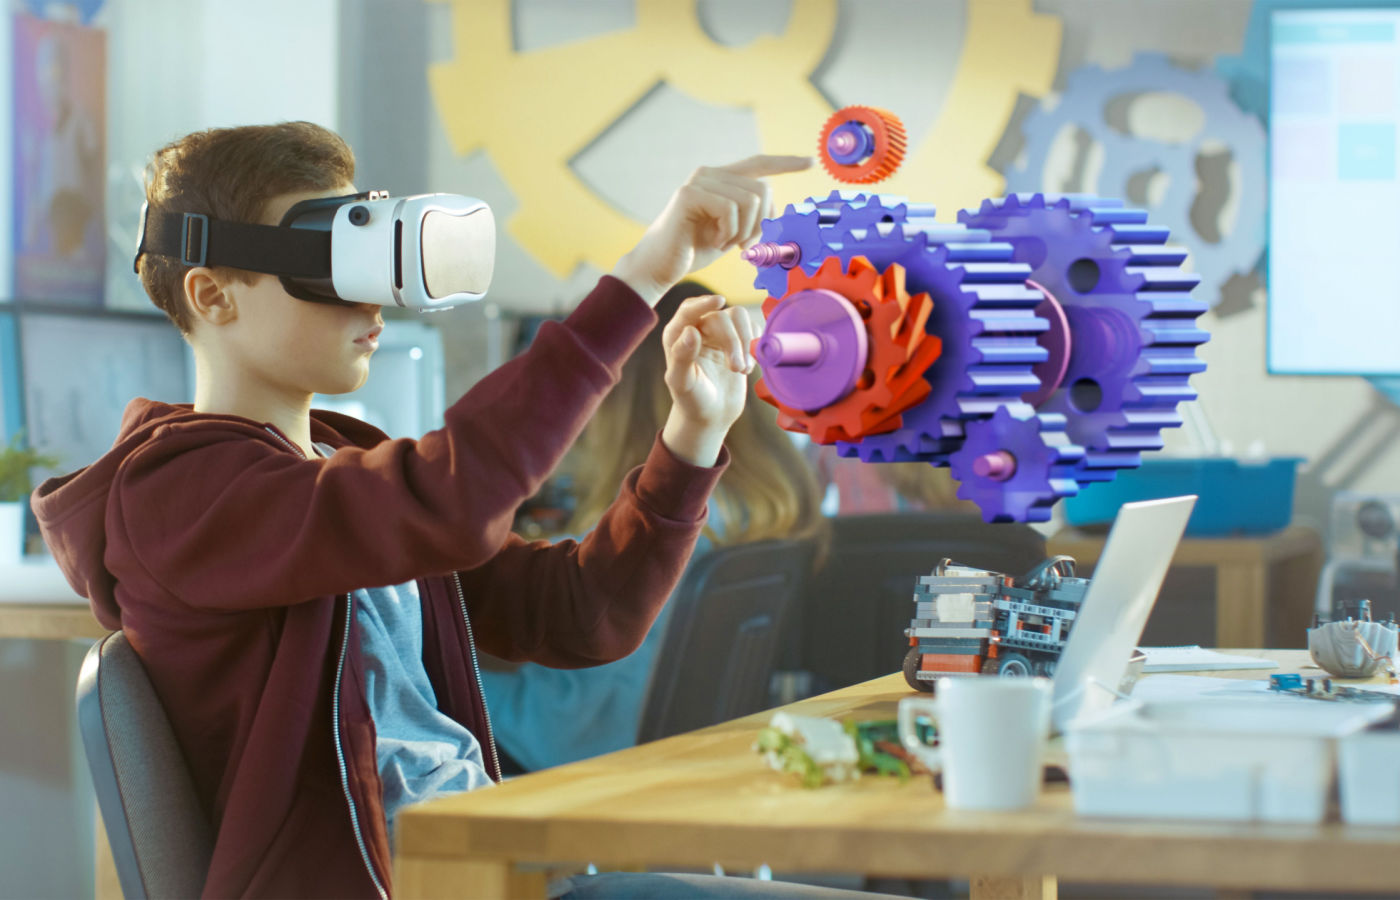 Role of Augmented and Virtual Reality in Education